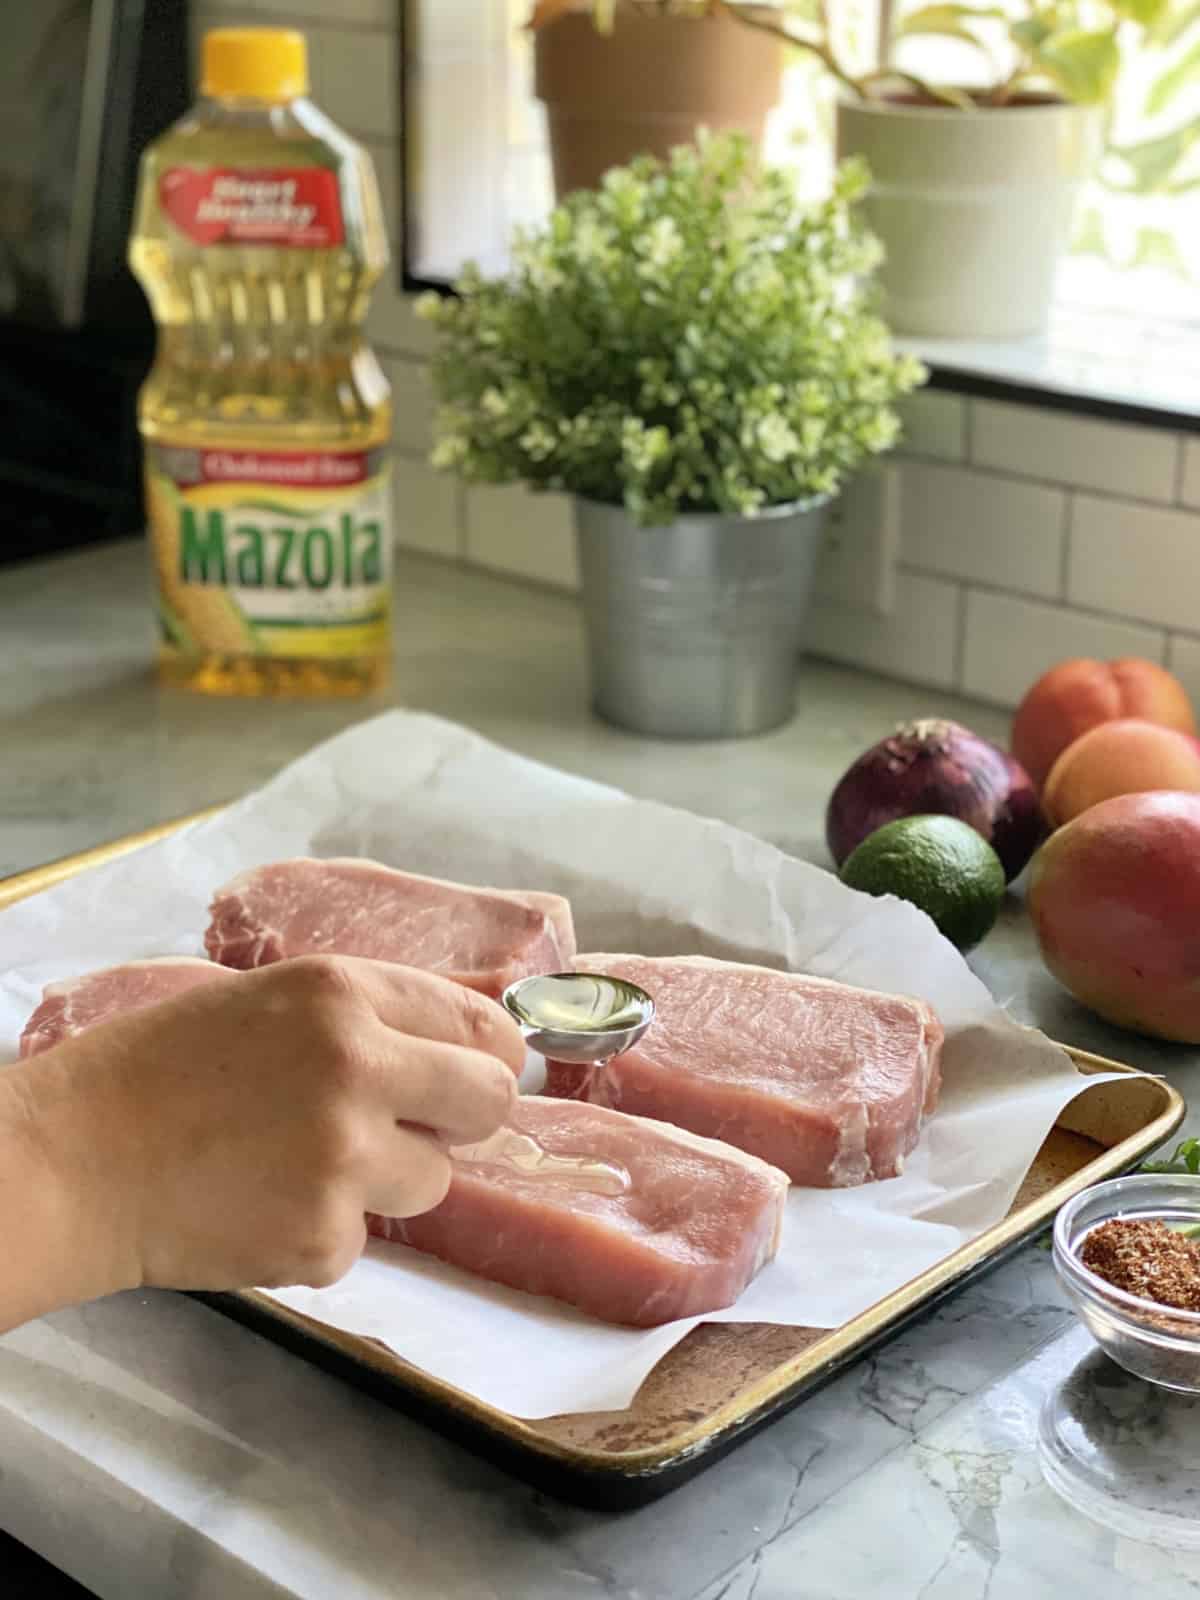 Female hand pouring a tablespoon of Mazola® Corn Oil over raw pork chops on a baking sheet.